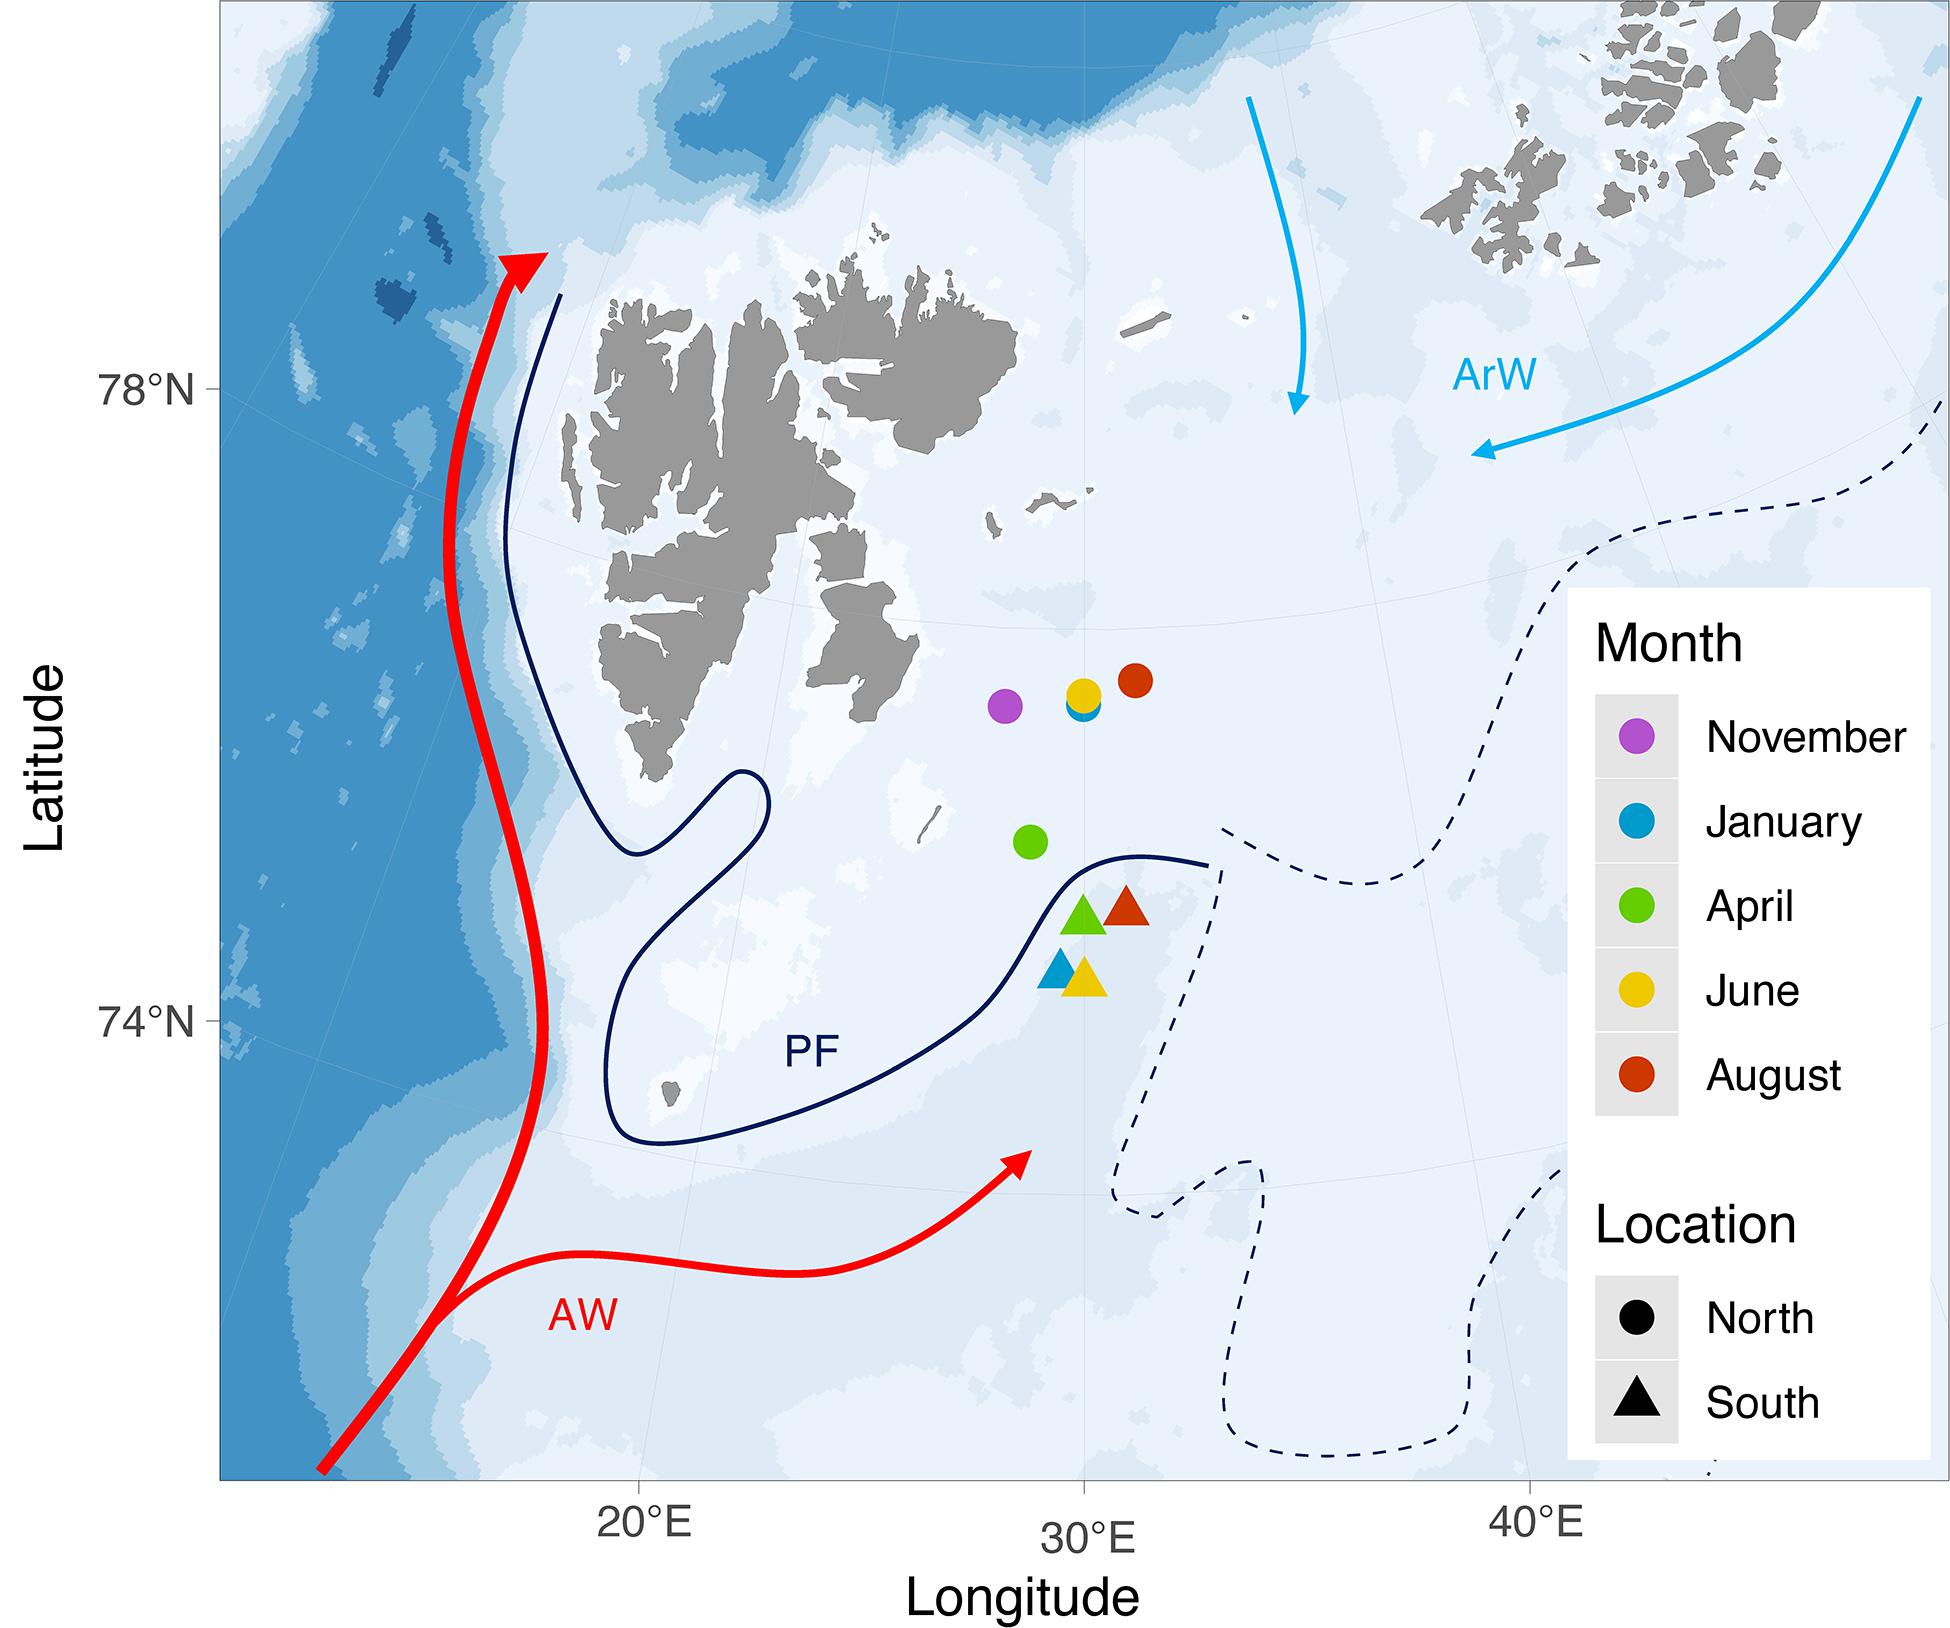 Across DNA Barents and Revealed Sea Barcoding Front Life-History Seasonality Traits High-Throughput Diversity, Frontiers Meroplankton the | by Polar